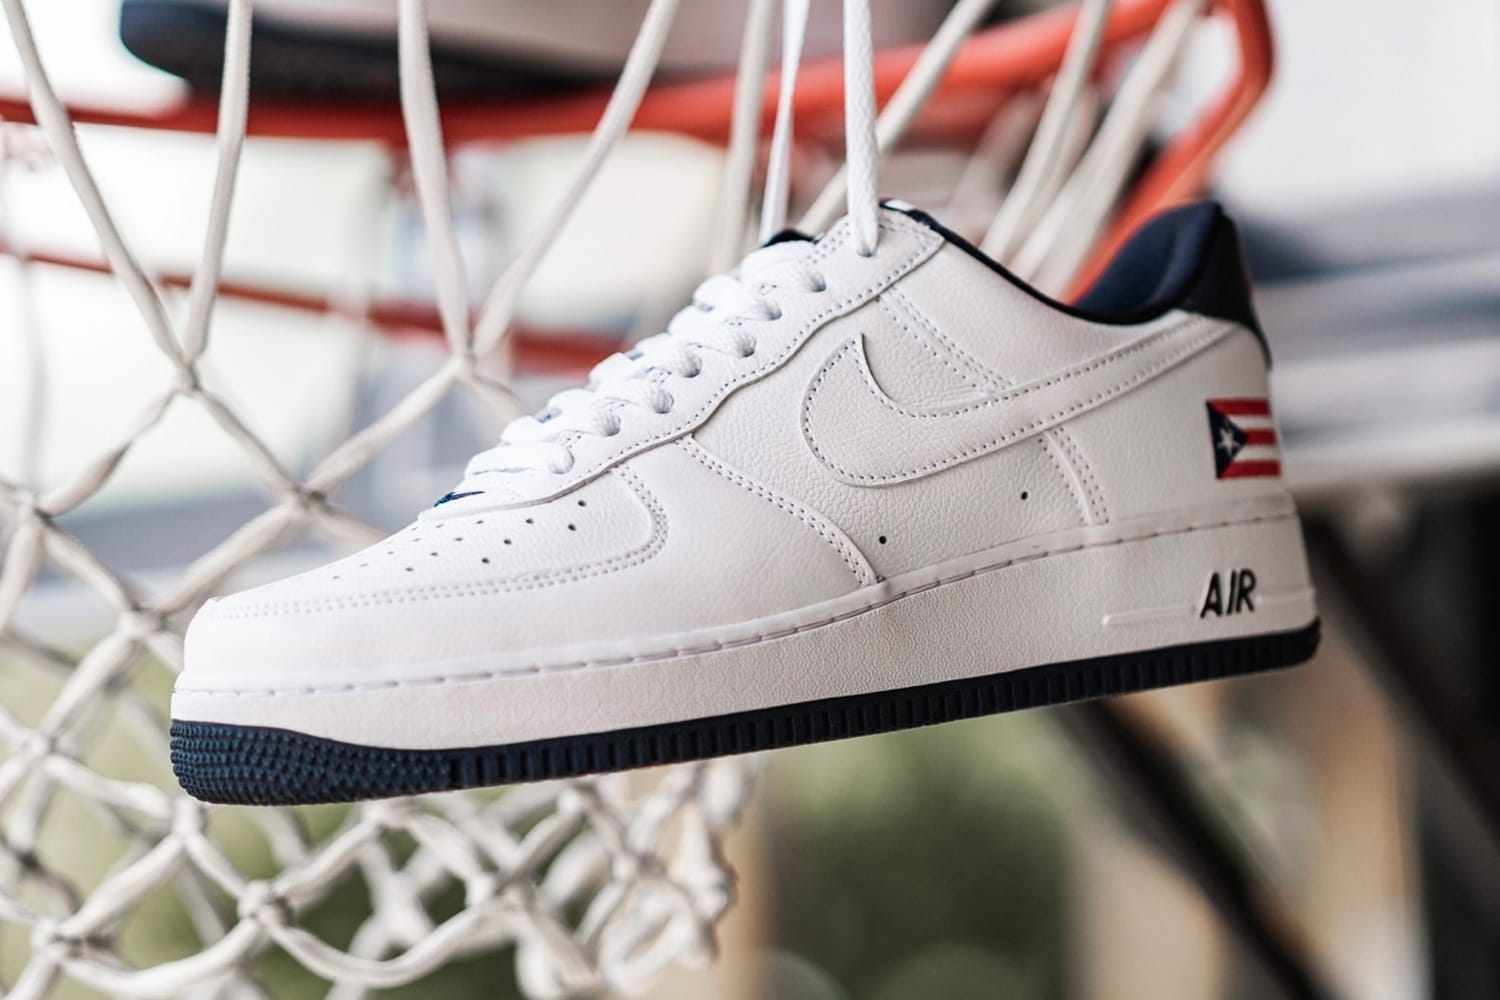 puerto rico air force 1s